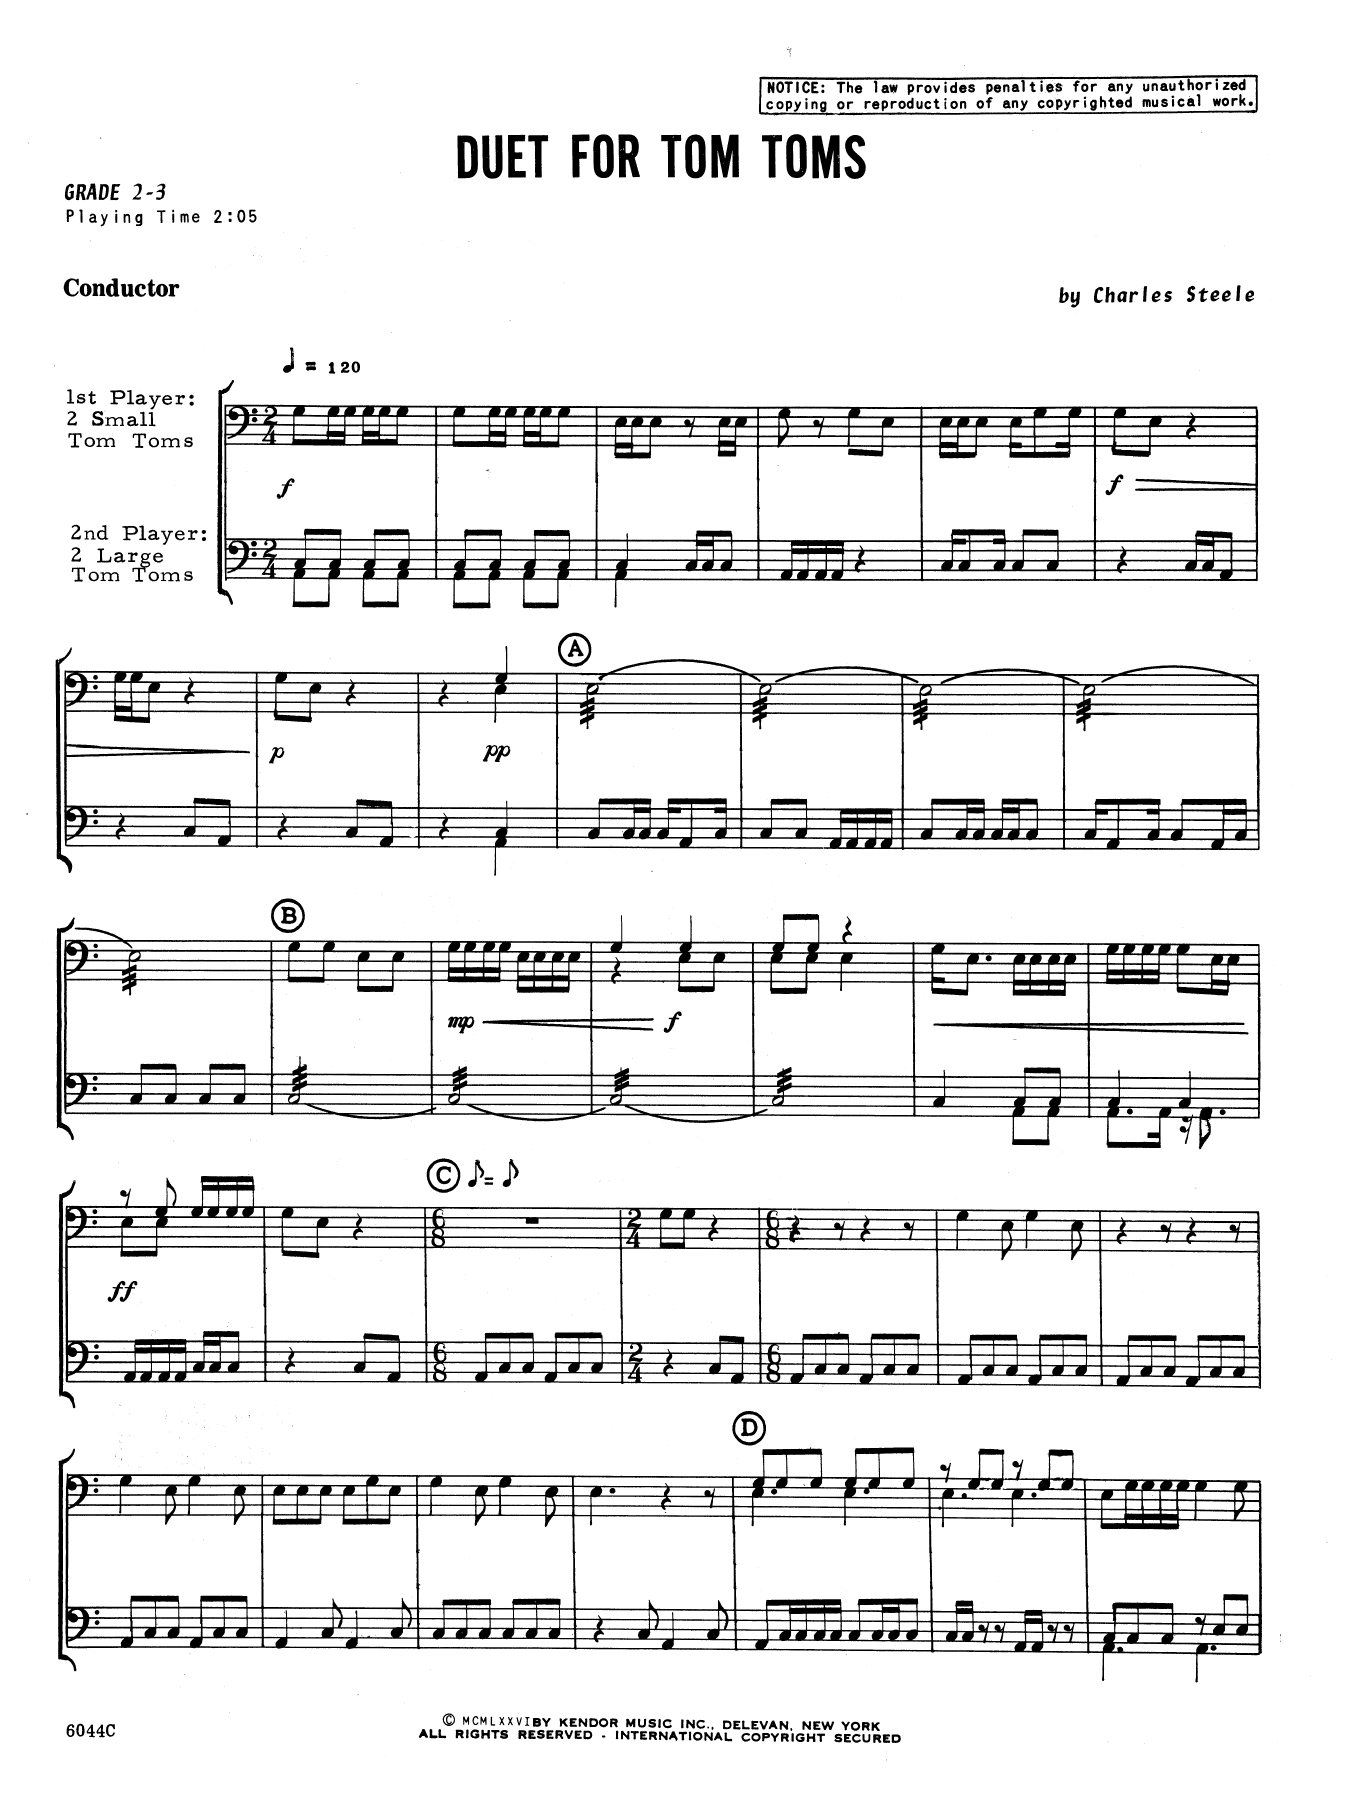 Download Charles Steele Duet For Tom Toms - Full Score Sheet Music